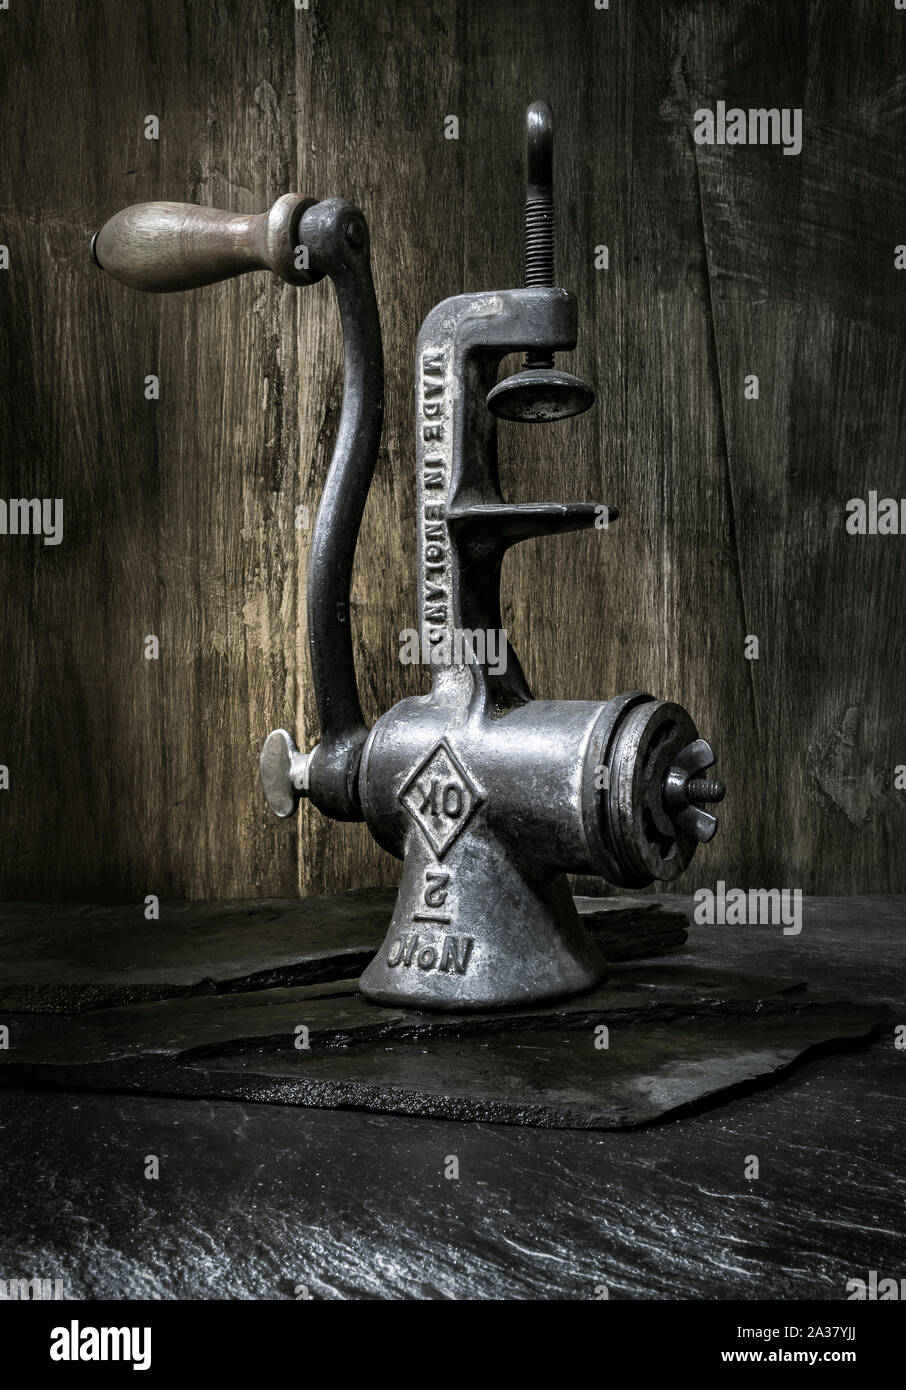 Vintage meat grinder still life. Old fashioned tools from the kitchen of yesteryear. Stock Photo